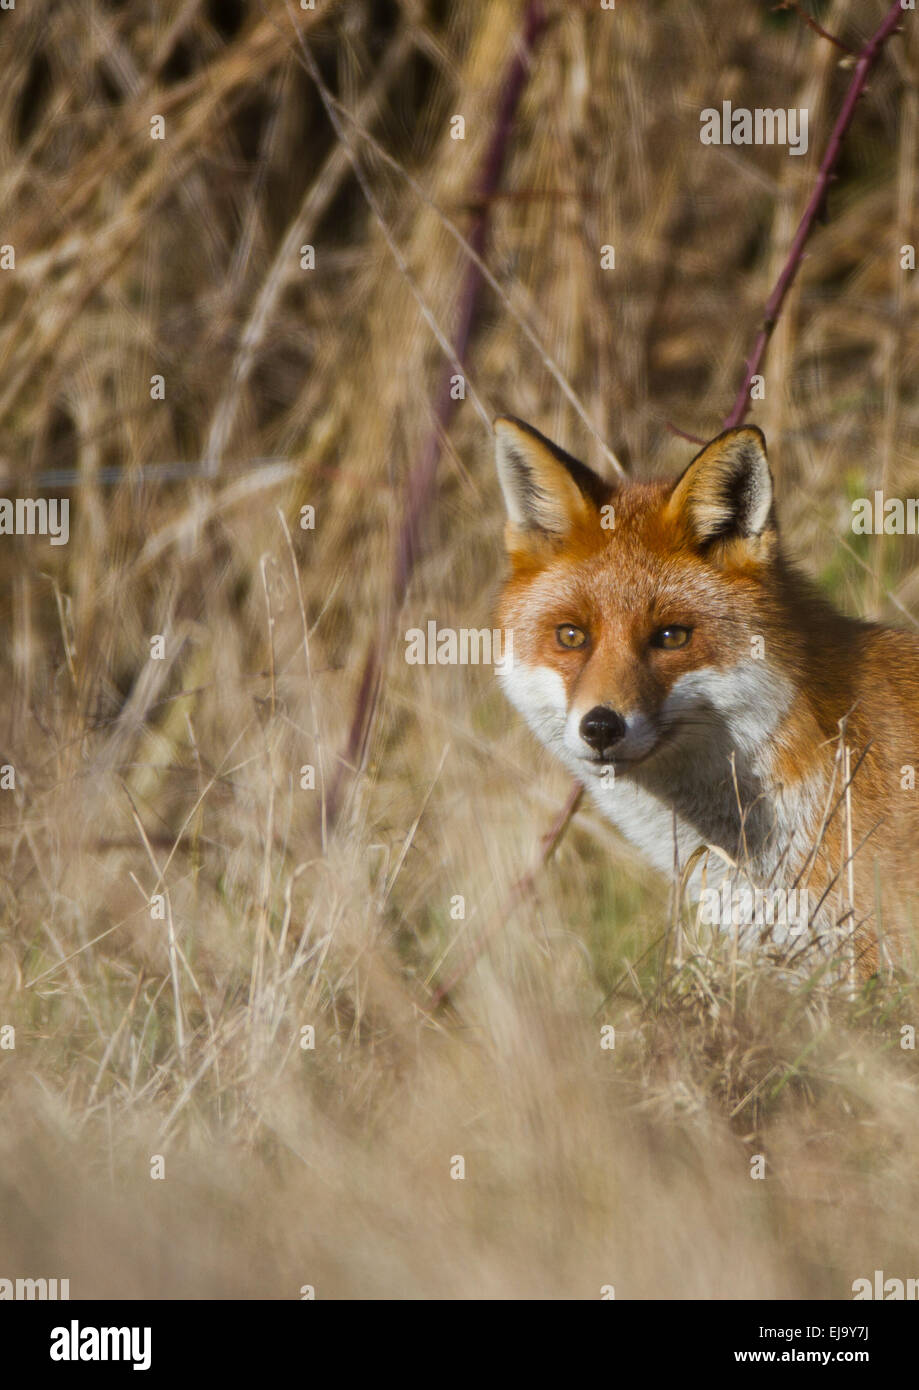 Wild Red Fox [Vulpes vulpes] caccia in tussock grass Foto Stock